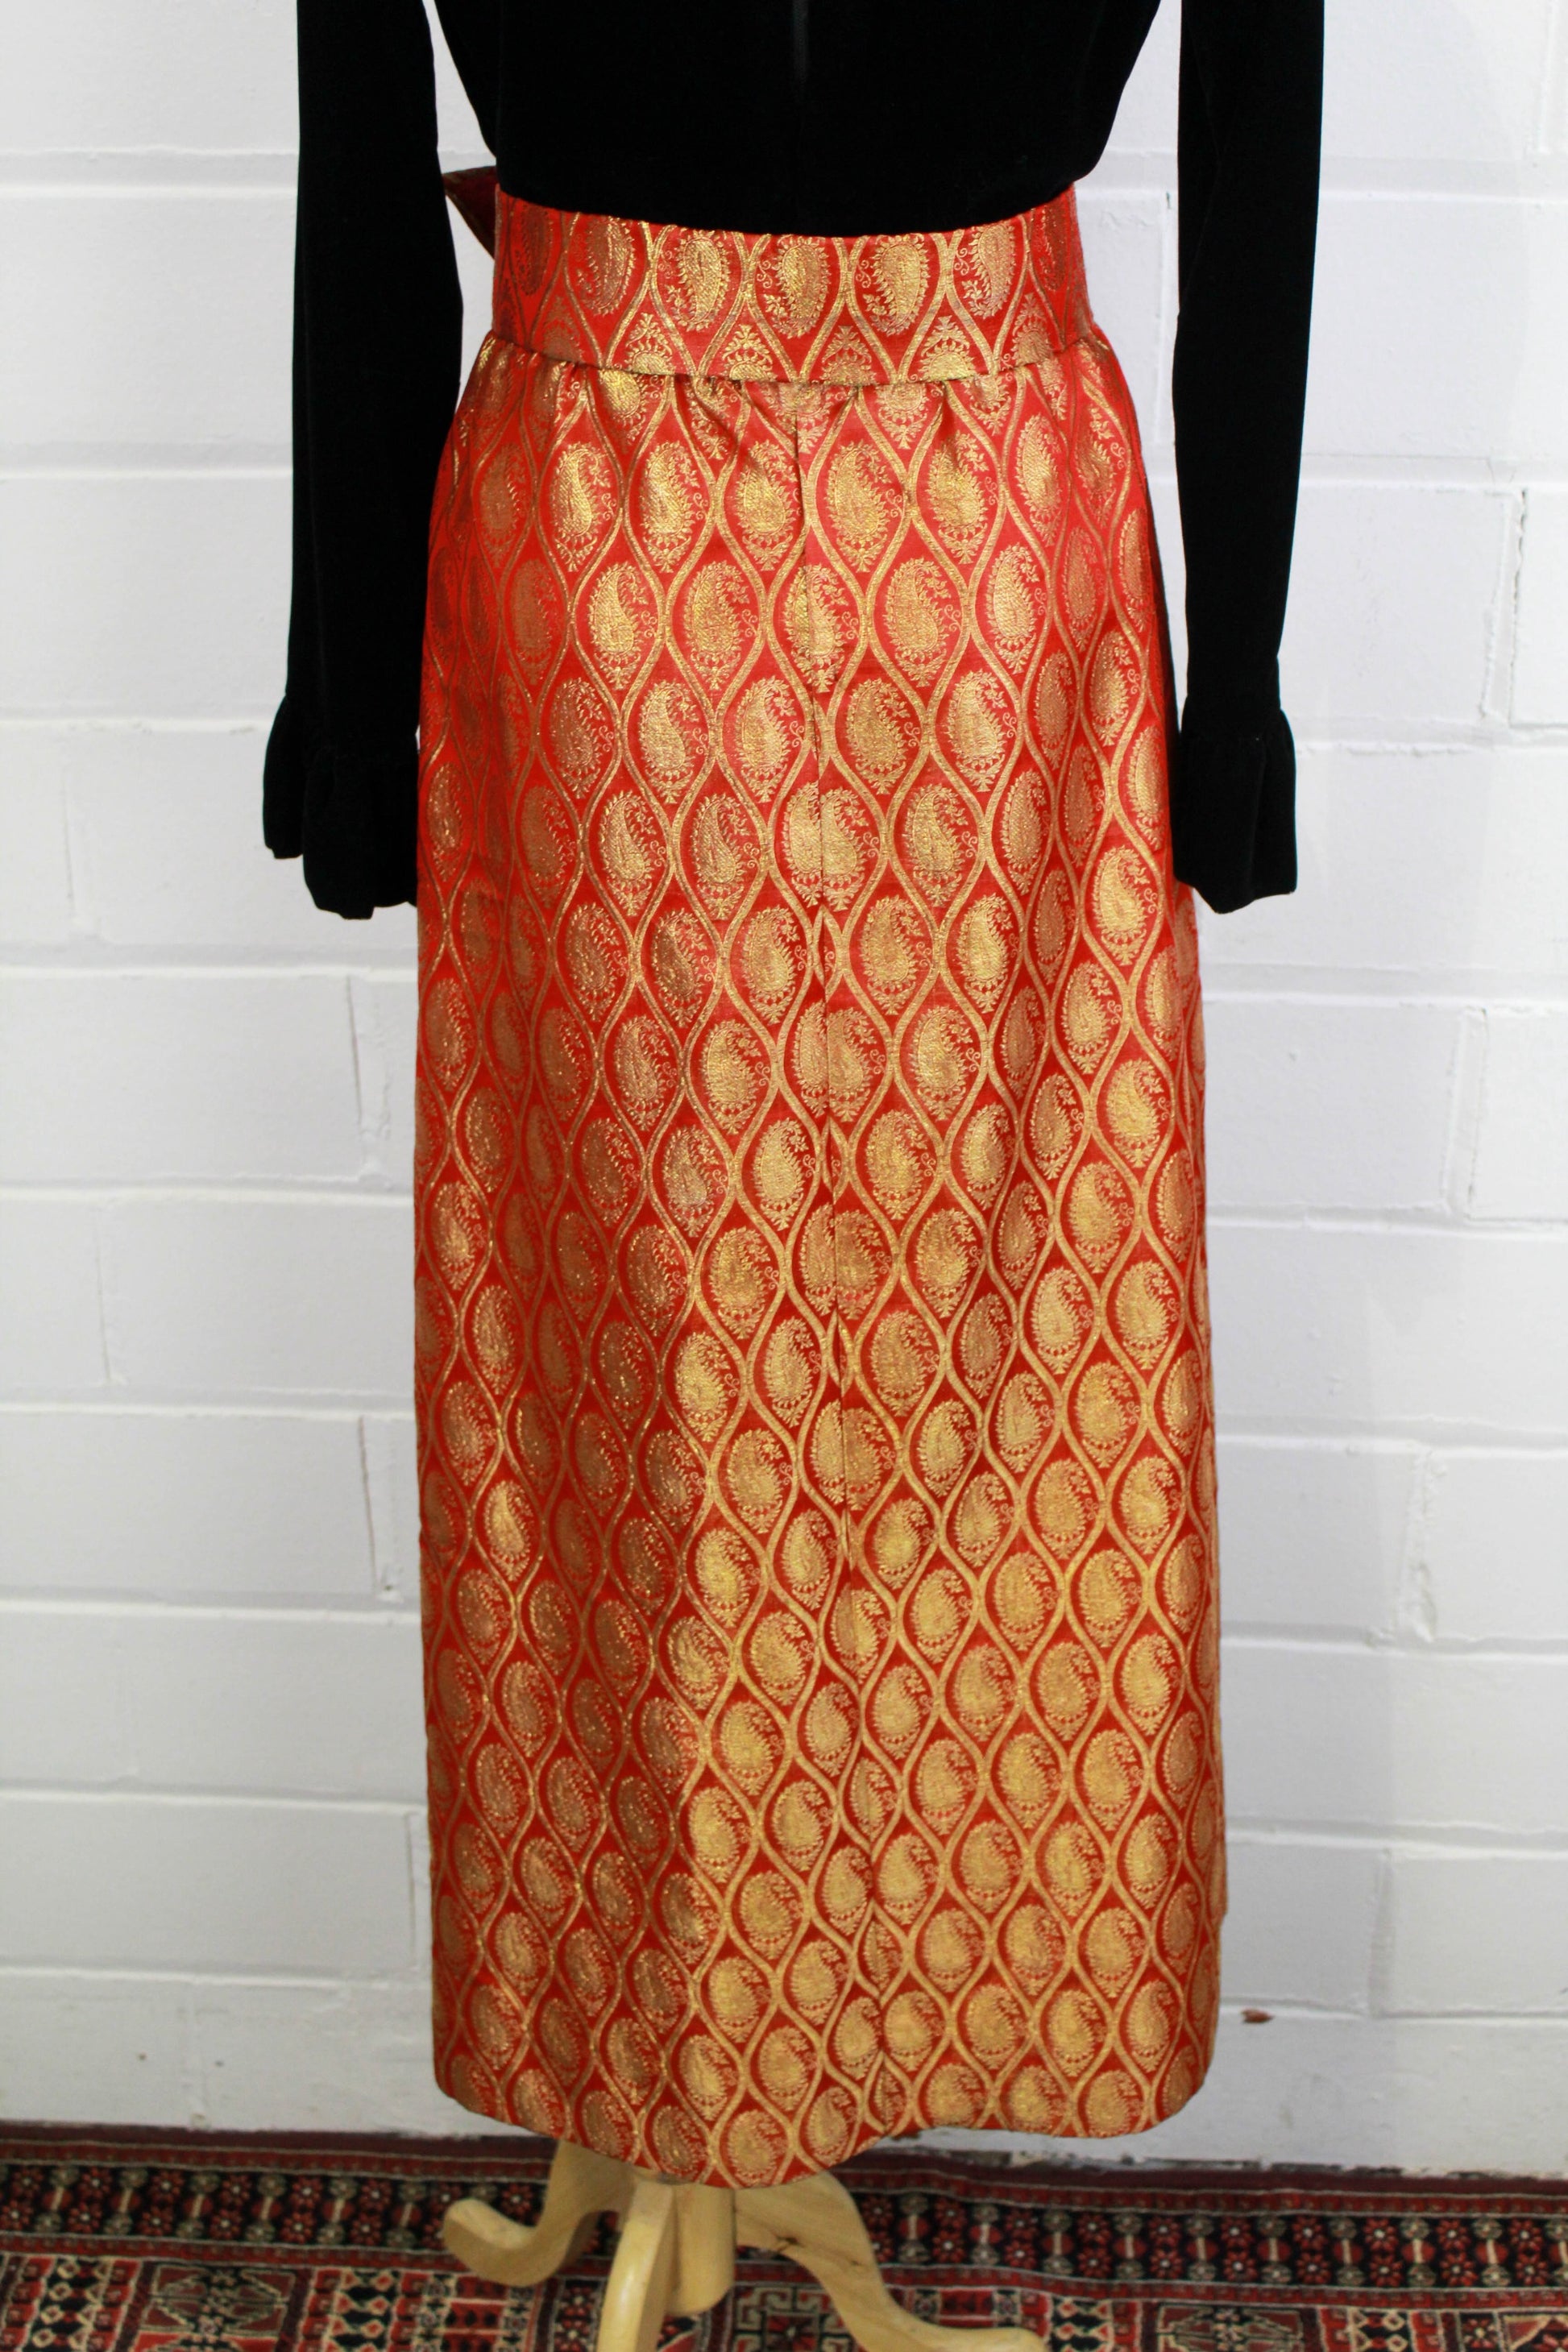 1970s maxi dress black velvet with red and gold metallic brocade skirt, ruffle collar back view